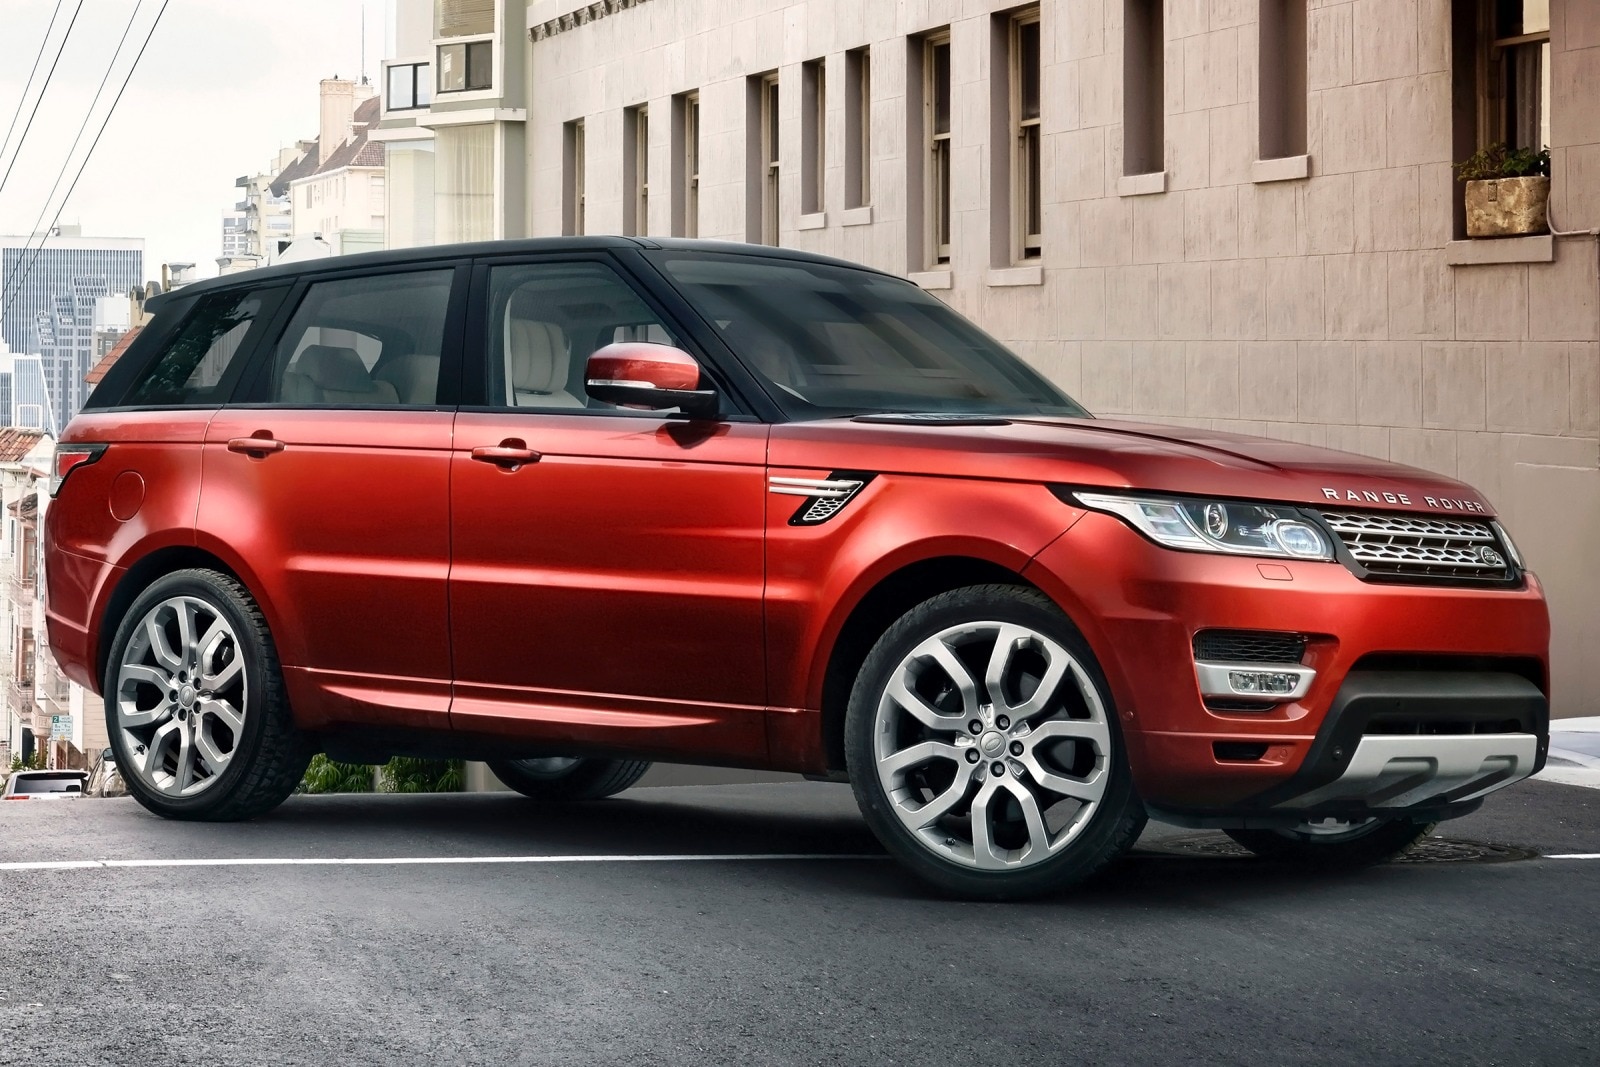 2016 Land Rover Range Rover Sport Review & Ratings | Edmunds